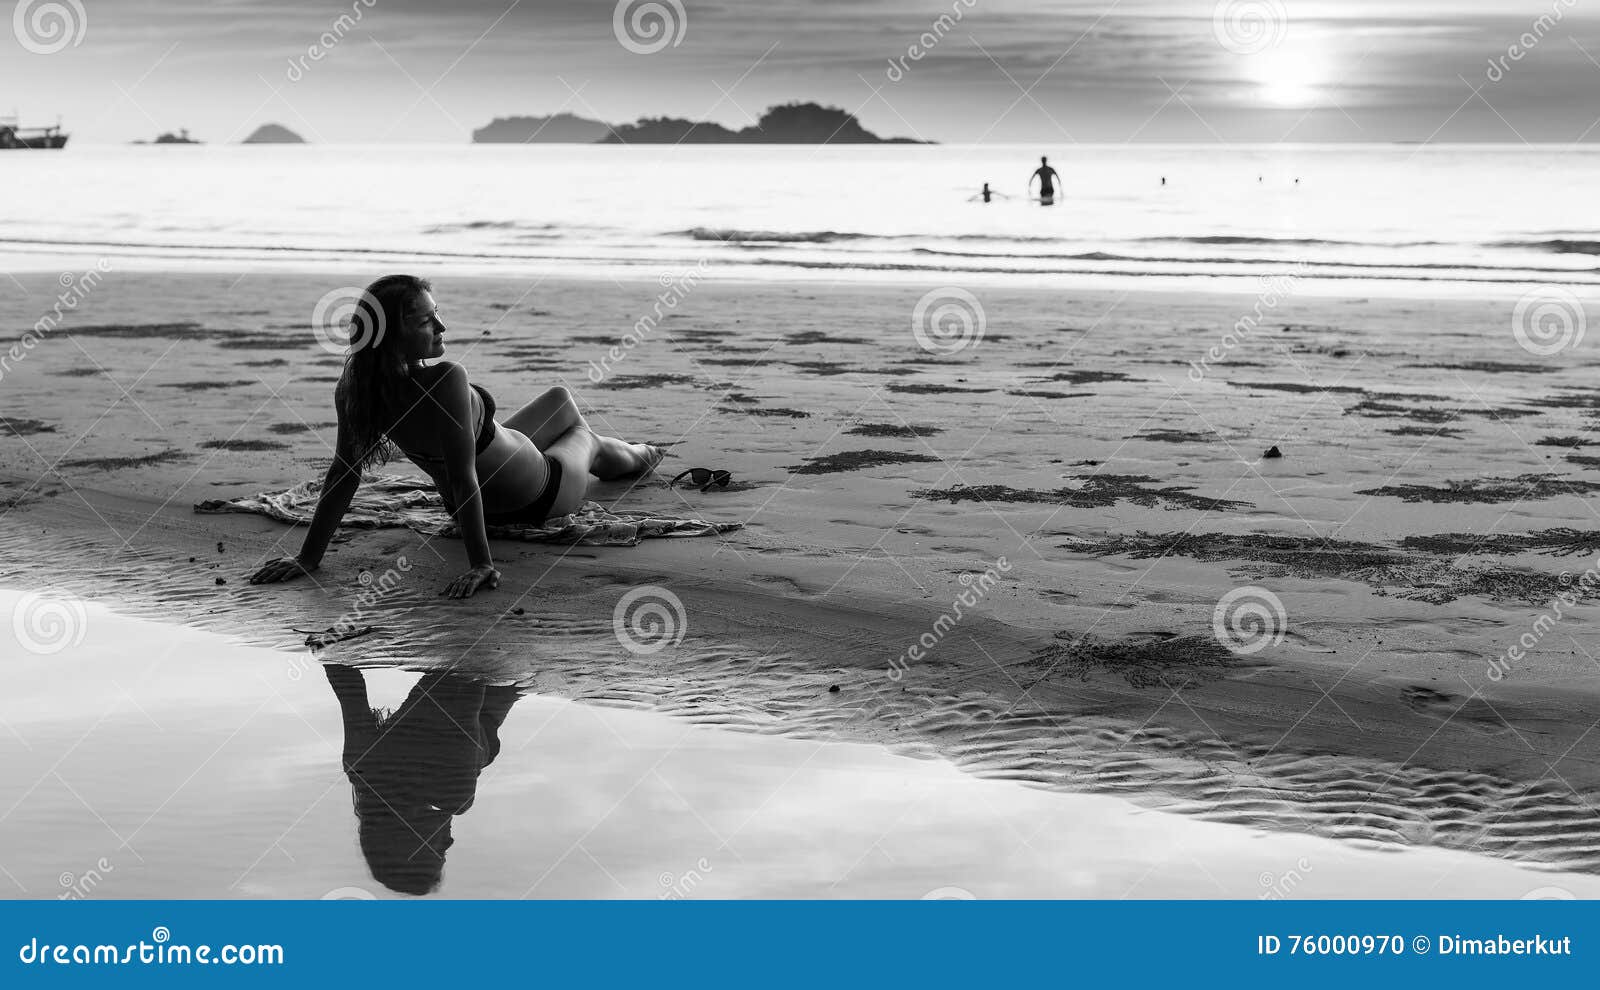 Black woman nude beach pics Beautiful Young Woman On The Beach Stock Photo Image Of Smiling Black 76000970